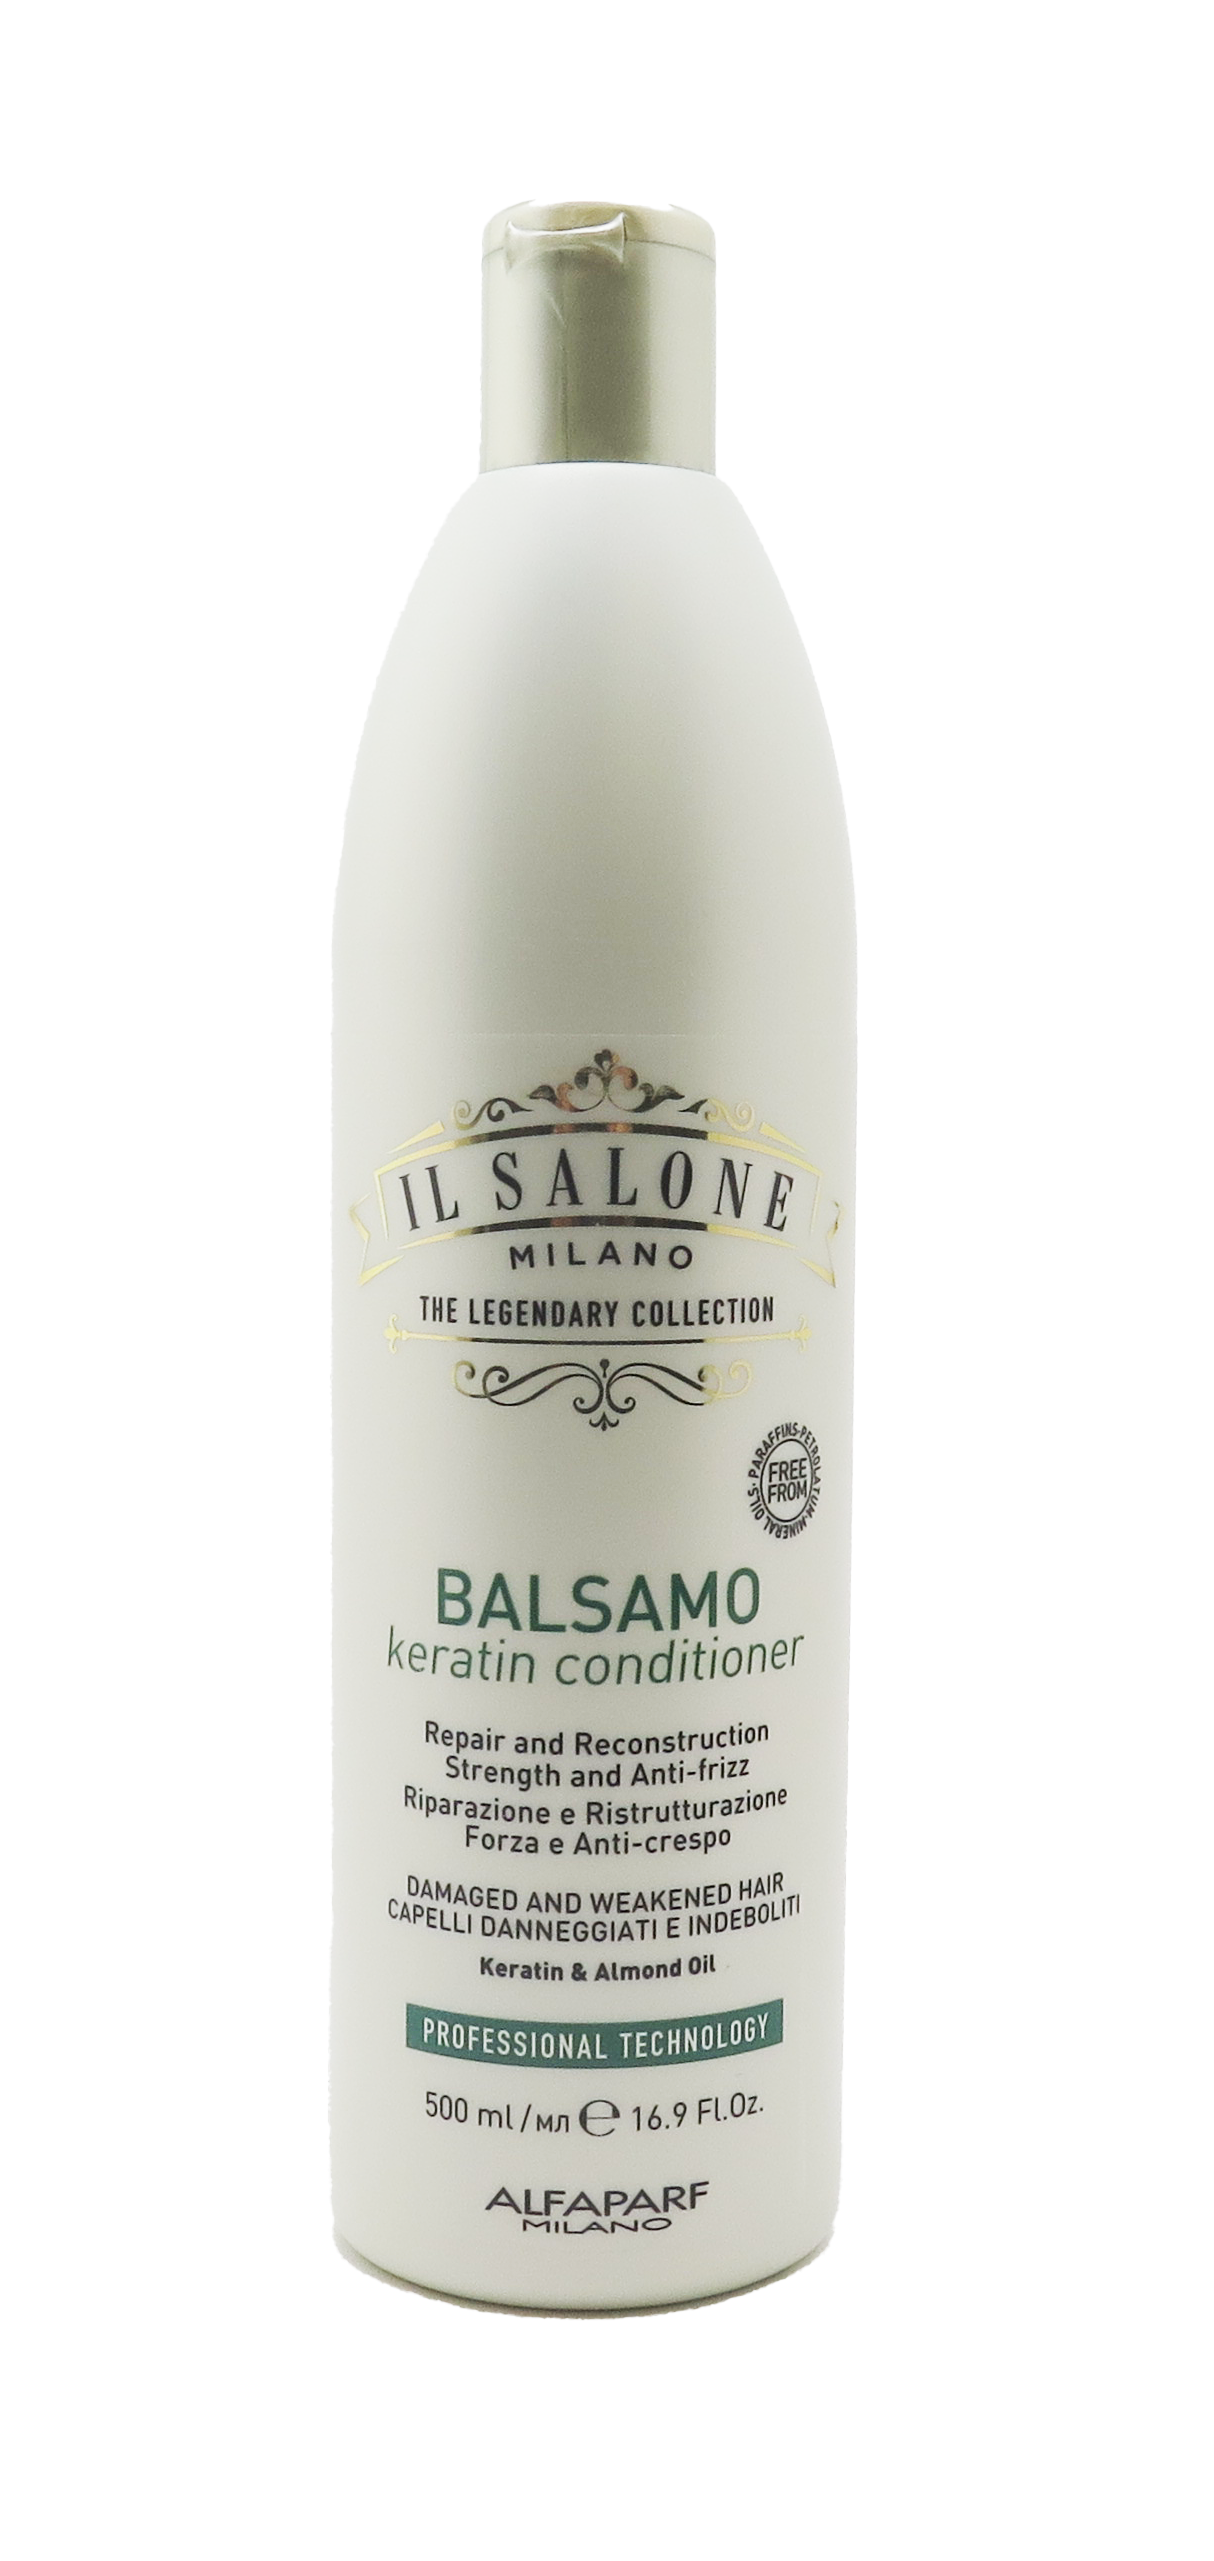 IL Salone Milano Keratin Conditioner for Damaged and Weakened Hair 500ml/16.9 fl oz